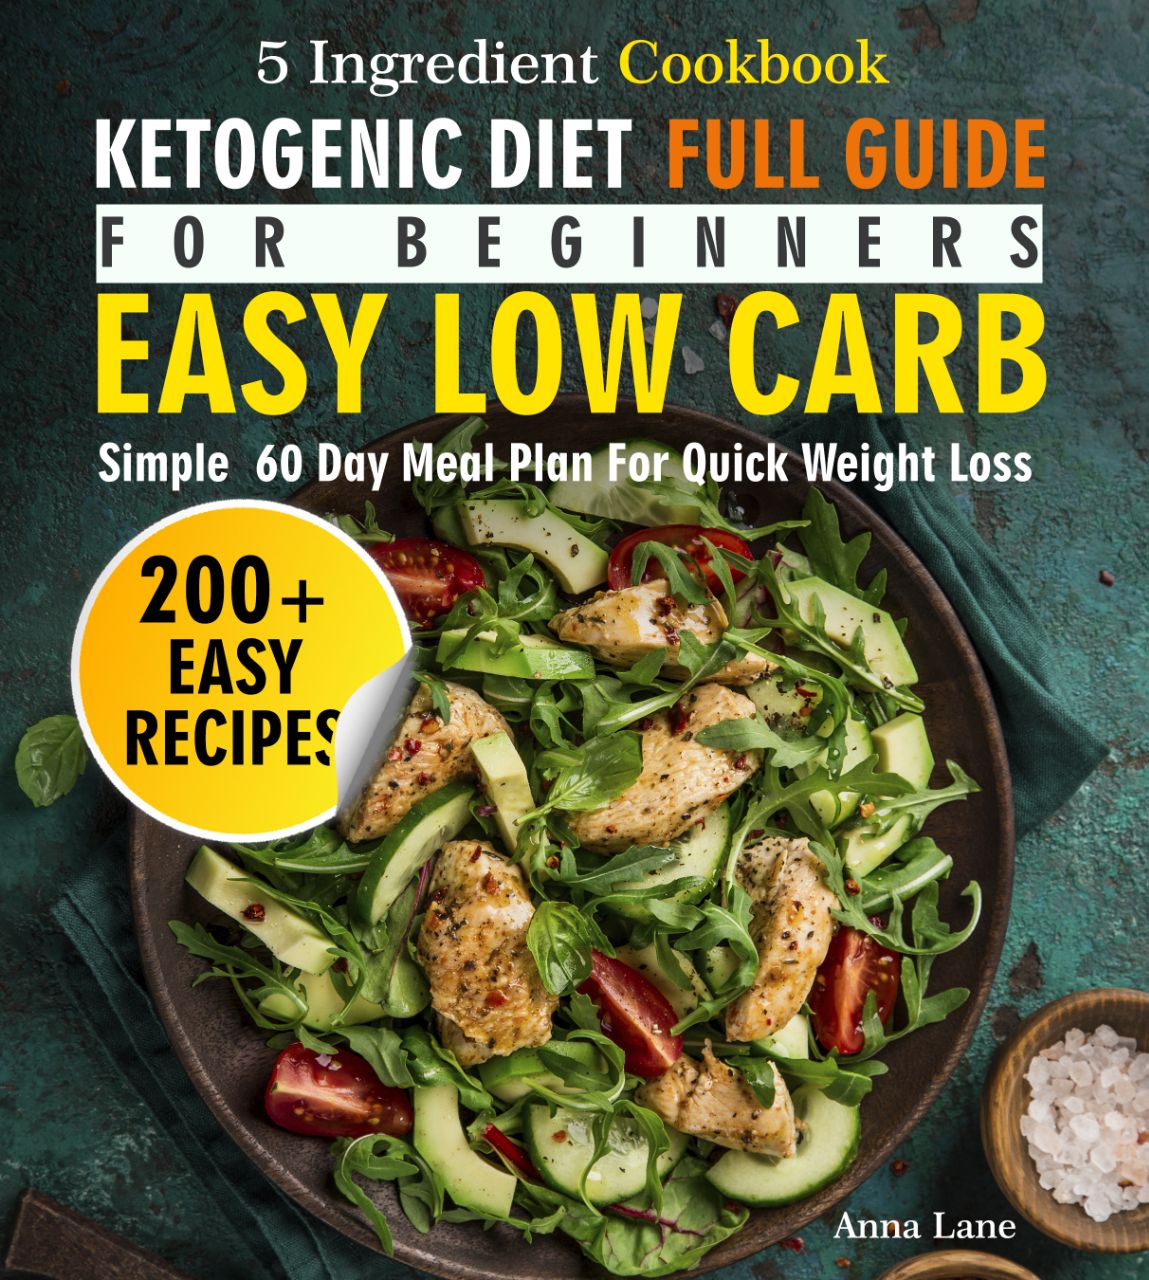 FREE: The Ketogenic Diet Full Guide for Beginners: An Easy, Low Carb, 5-Ingredient Cookbook: by Anna Lane